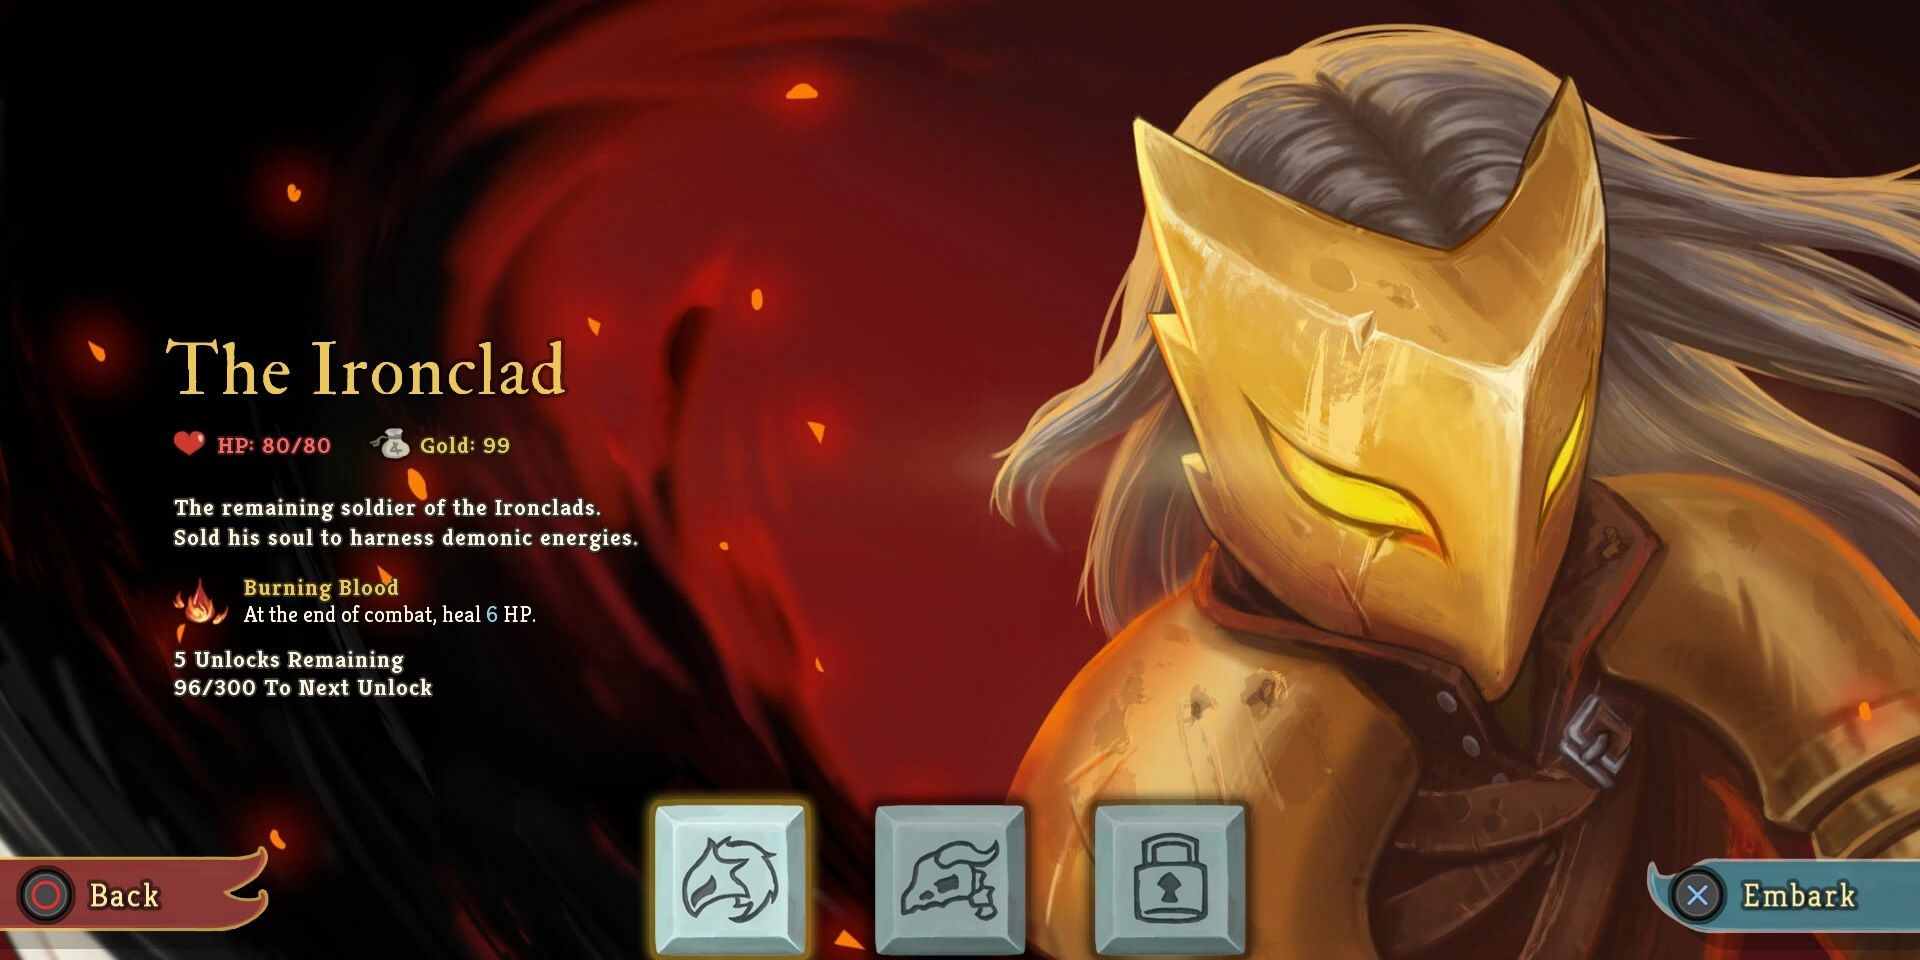 A screenshot showing details about the ironclad character class in Slay the Spire